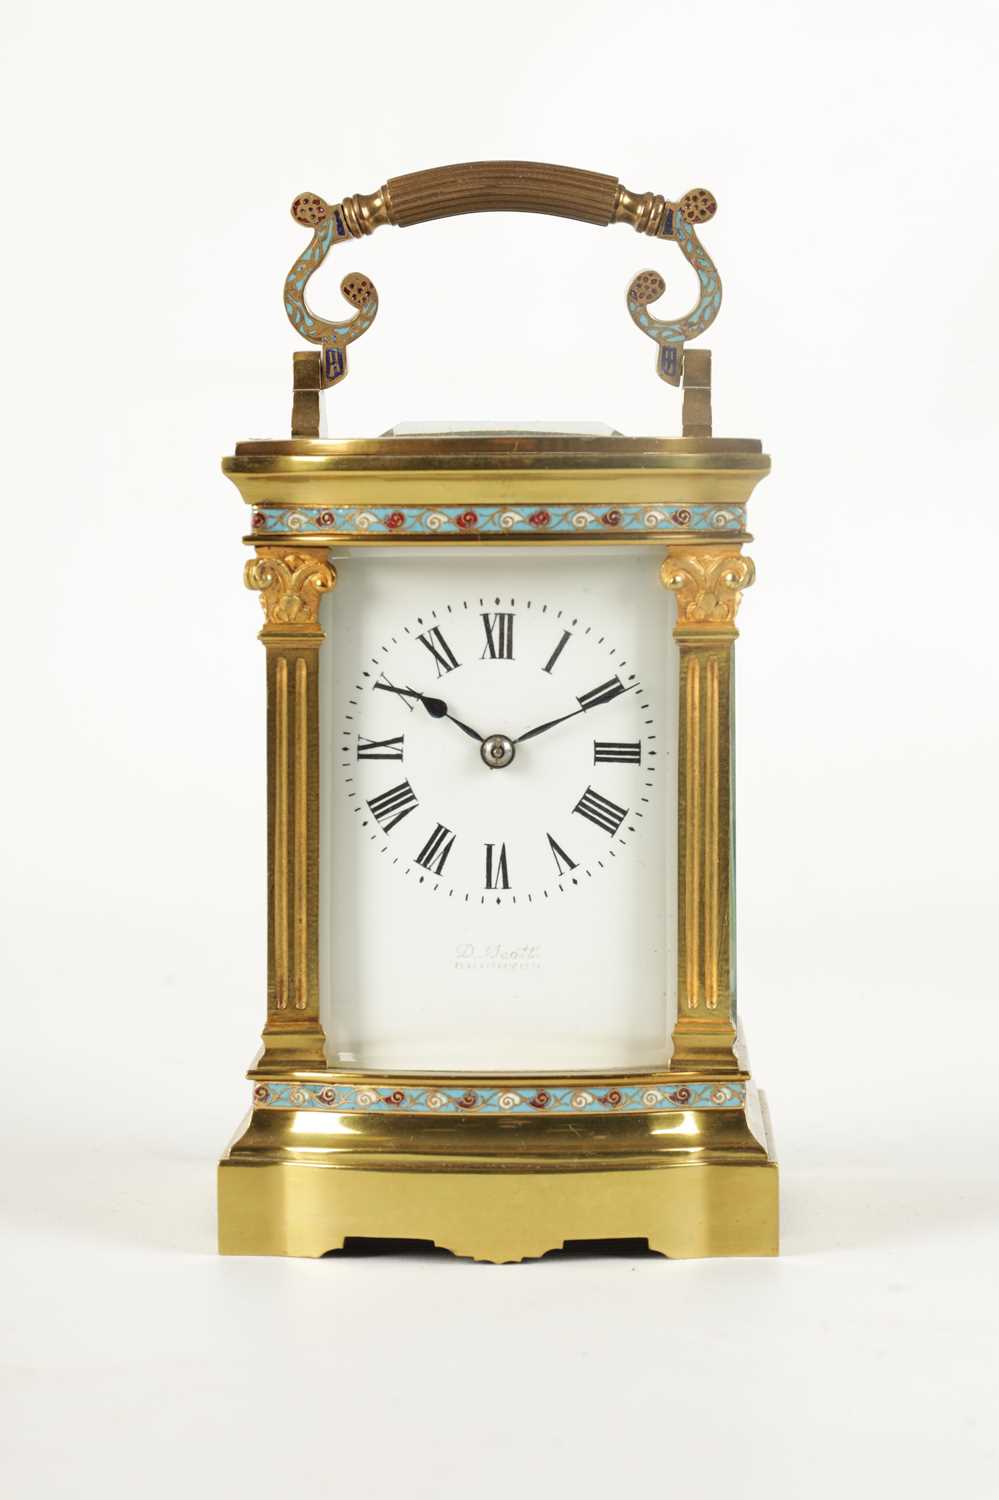 A LATE 19TH CENTURY FRENCH CHAMPLEVE ENAMEL STRIKING CARRIAGE CLOCK - Image 2 of 8